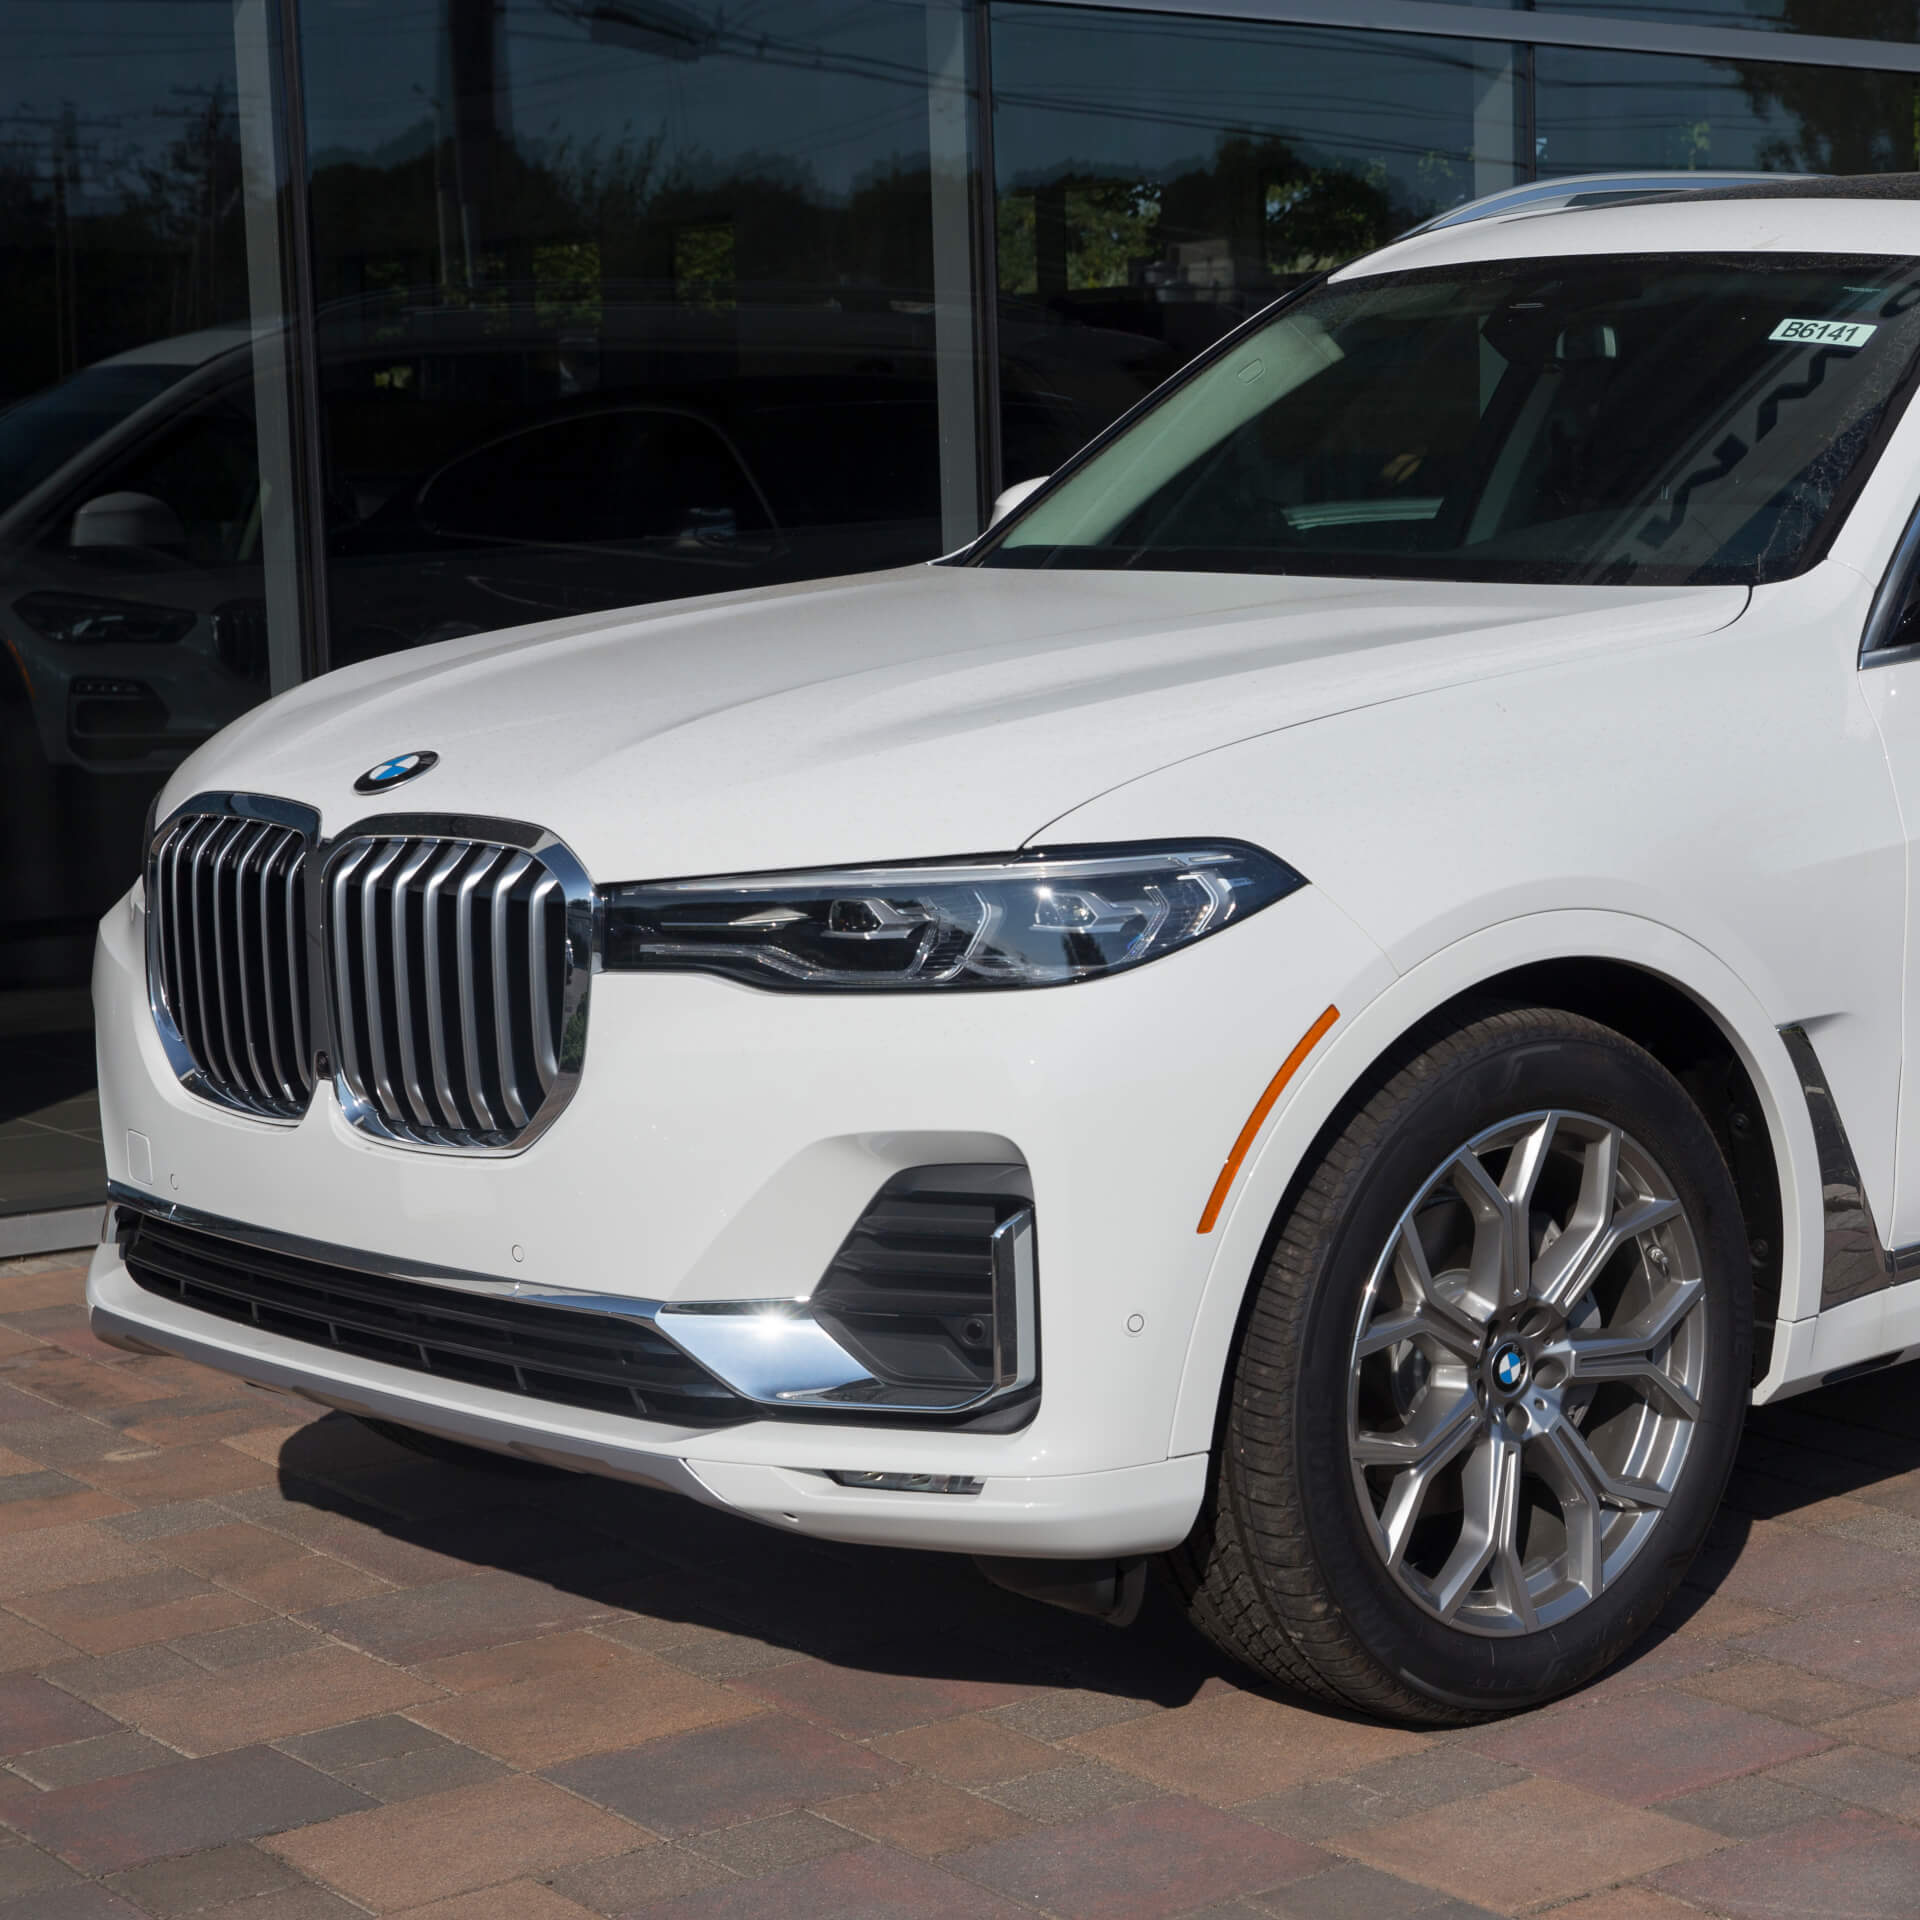 Direct4x4 accessories for BMW X7 vehicles with a photo of the front of a white BMW X7